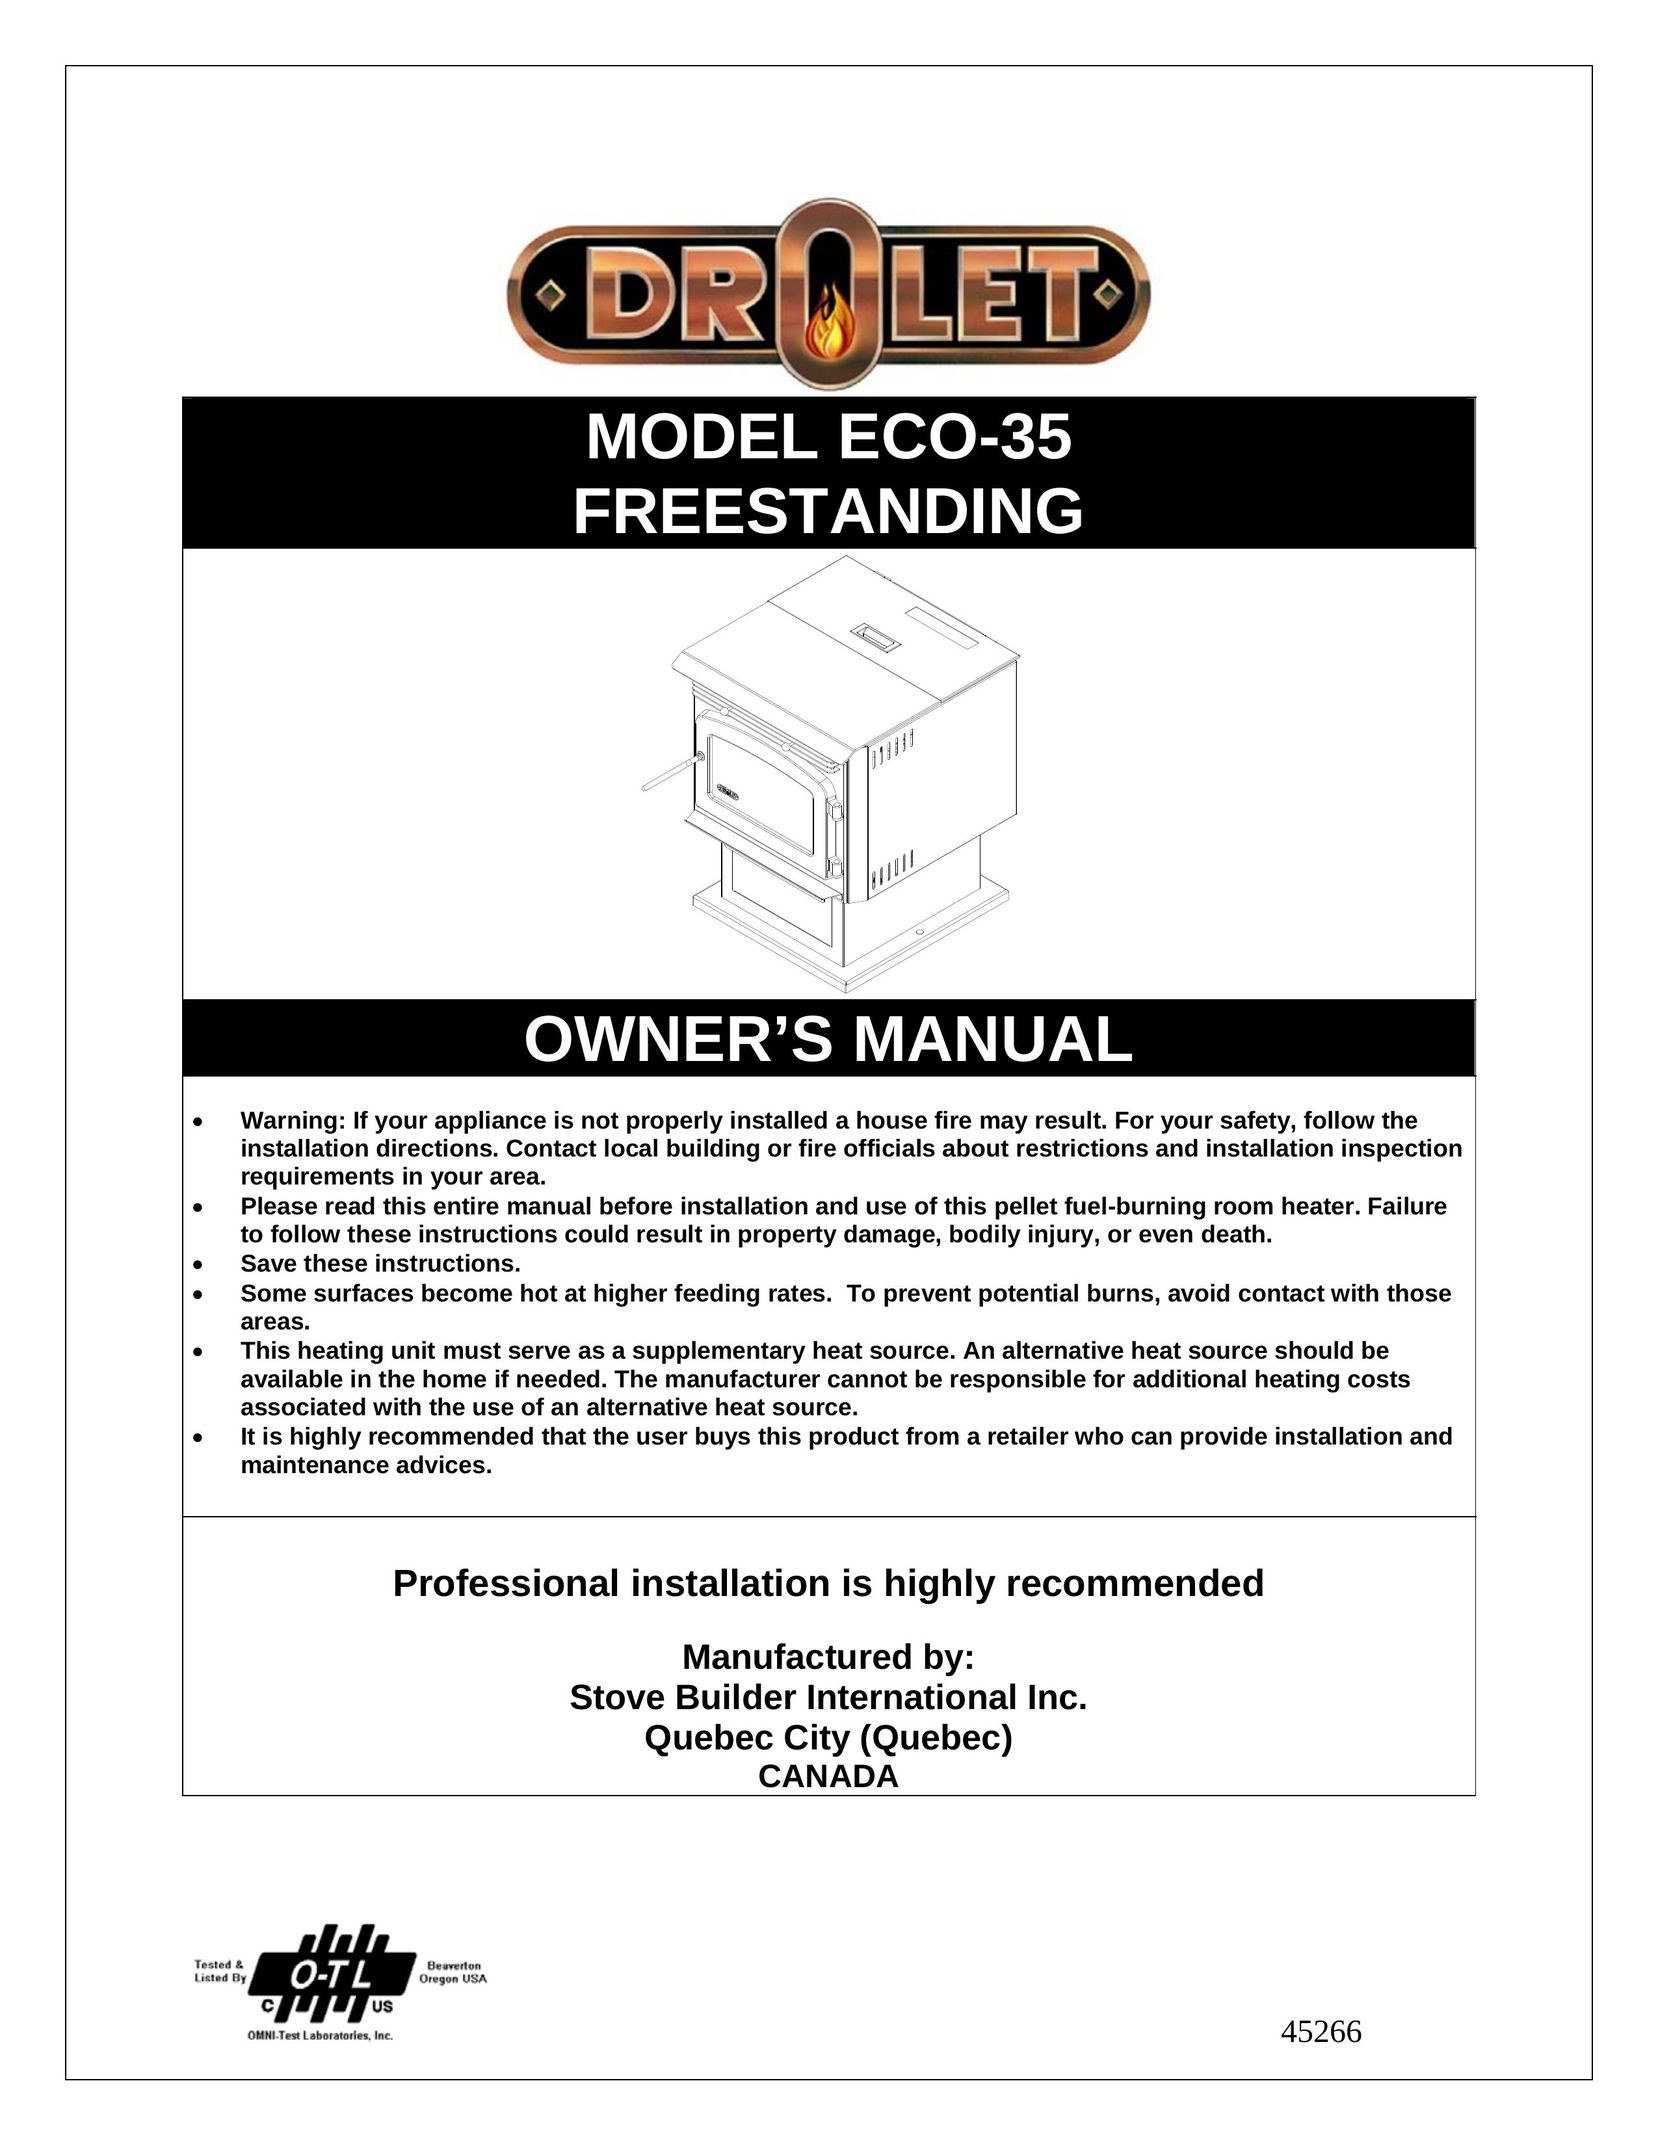 Drolet ECO-35 Stove User Manual